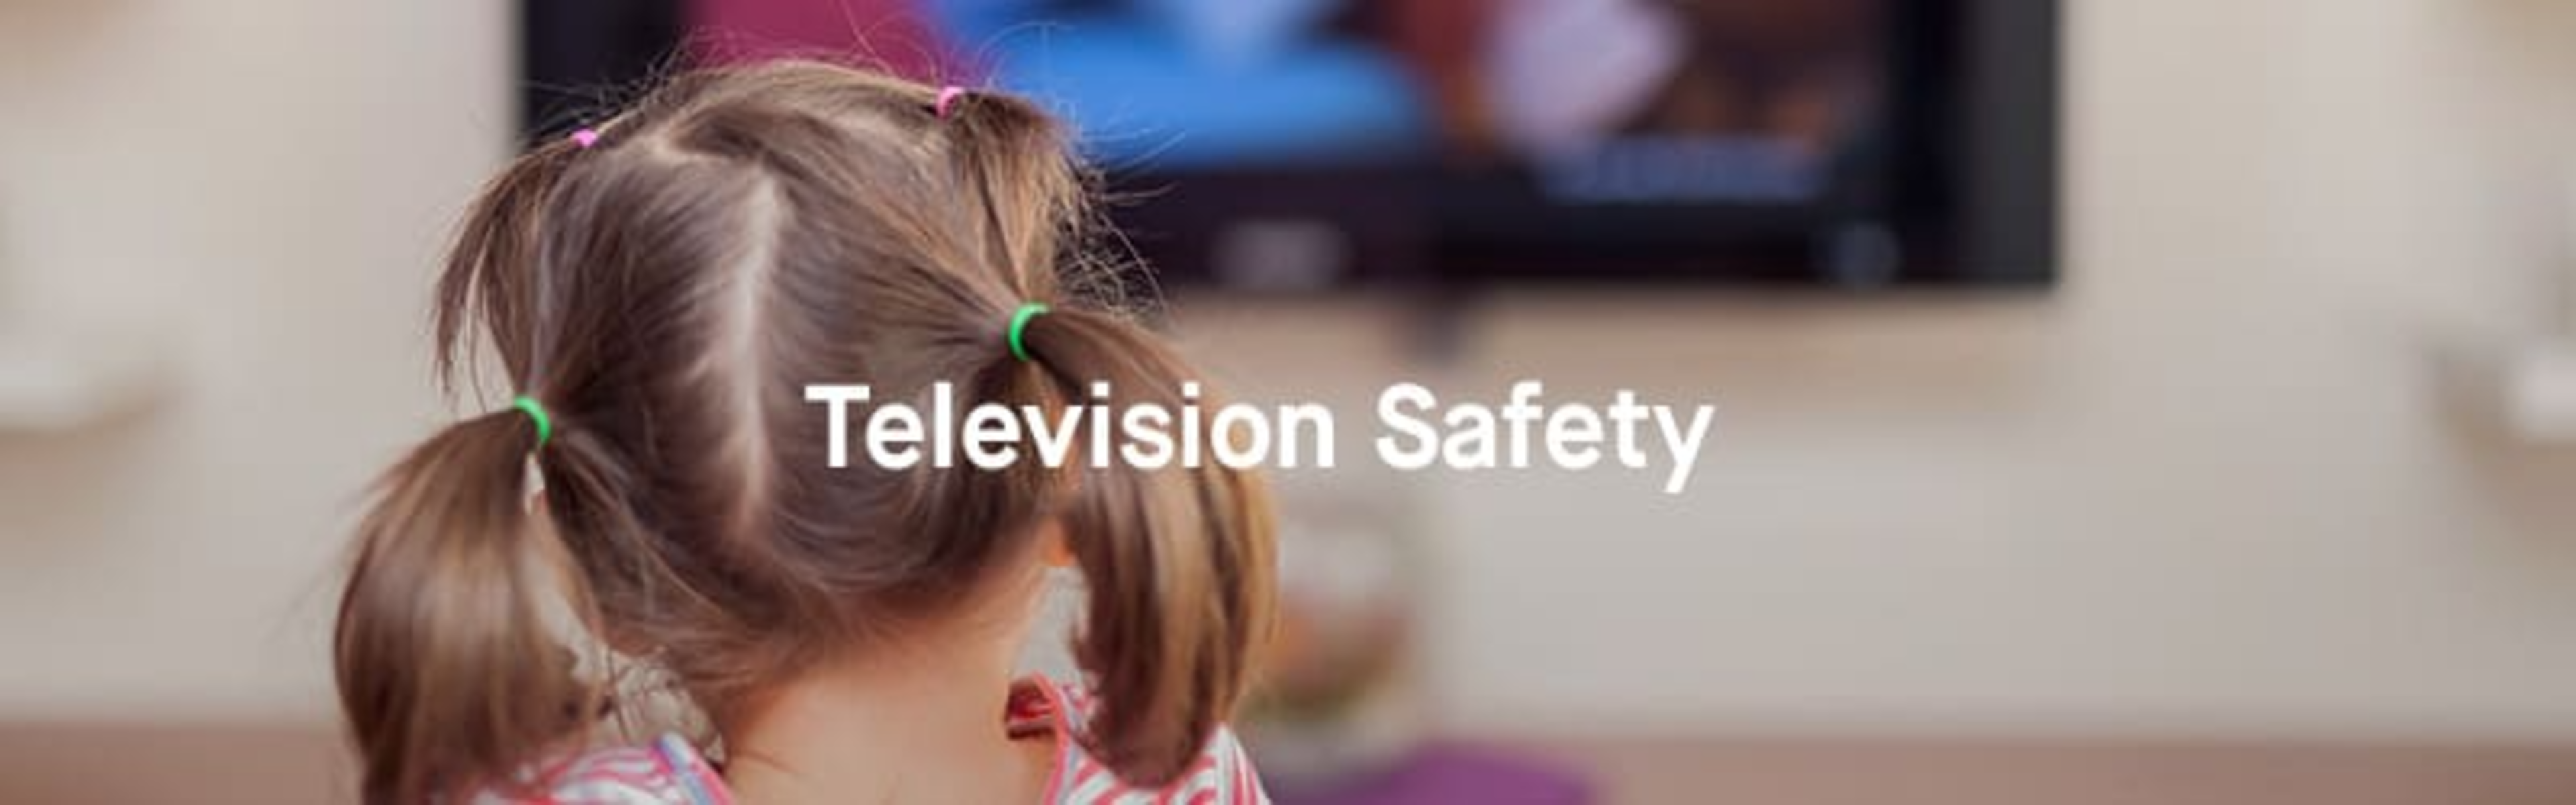 television safety